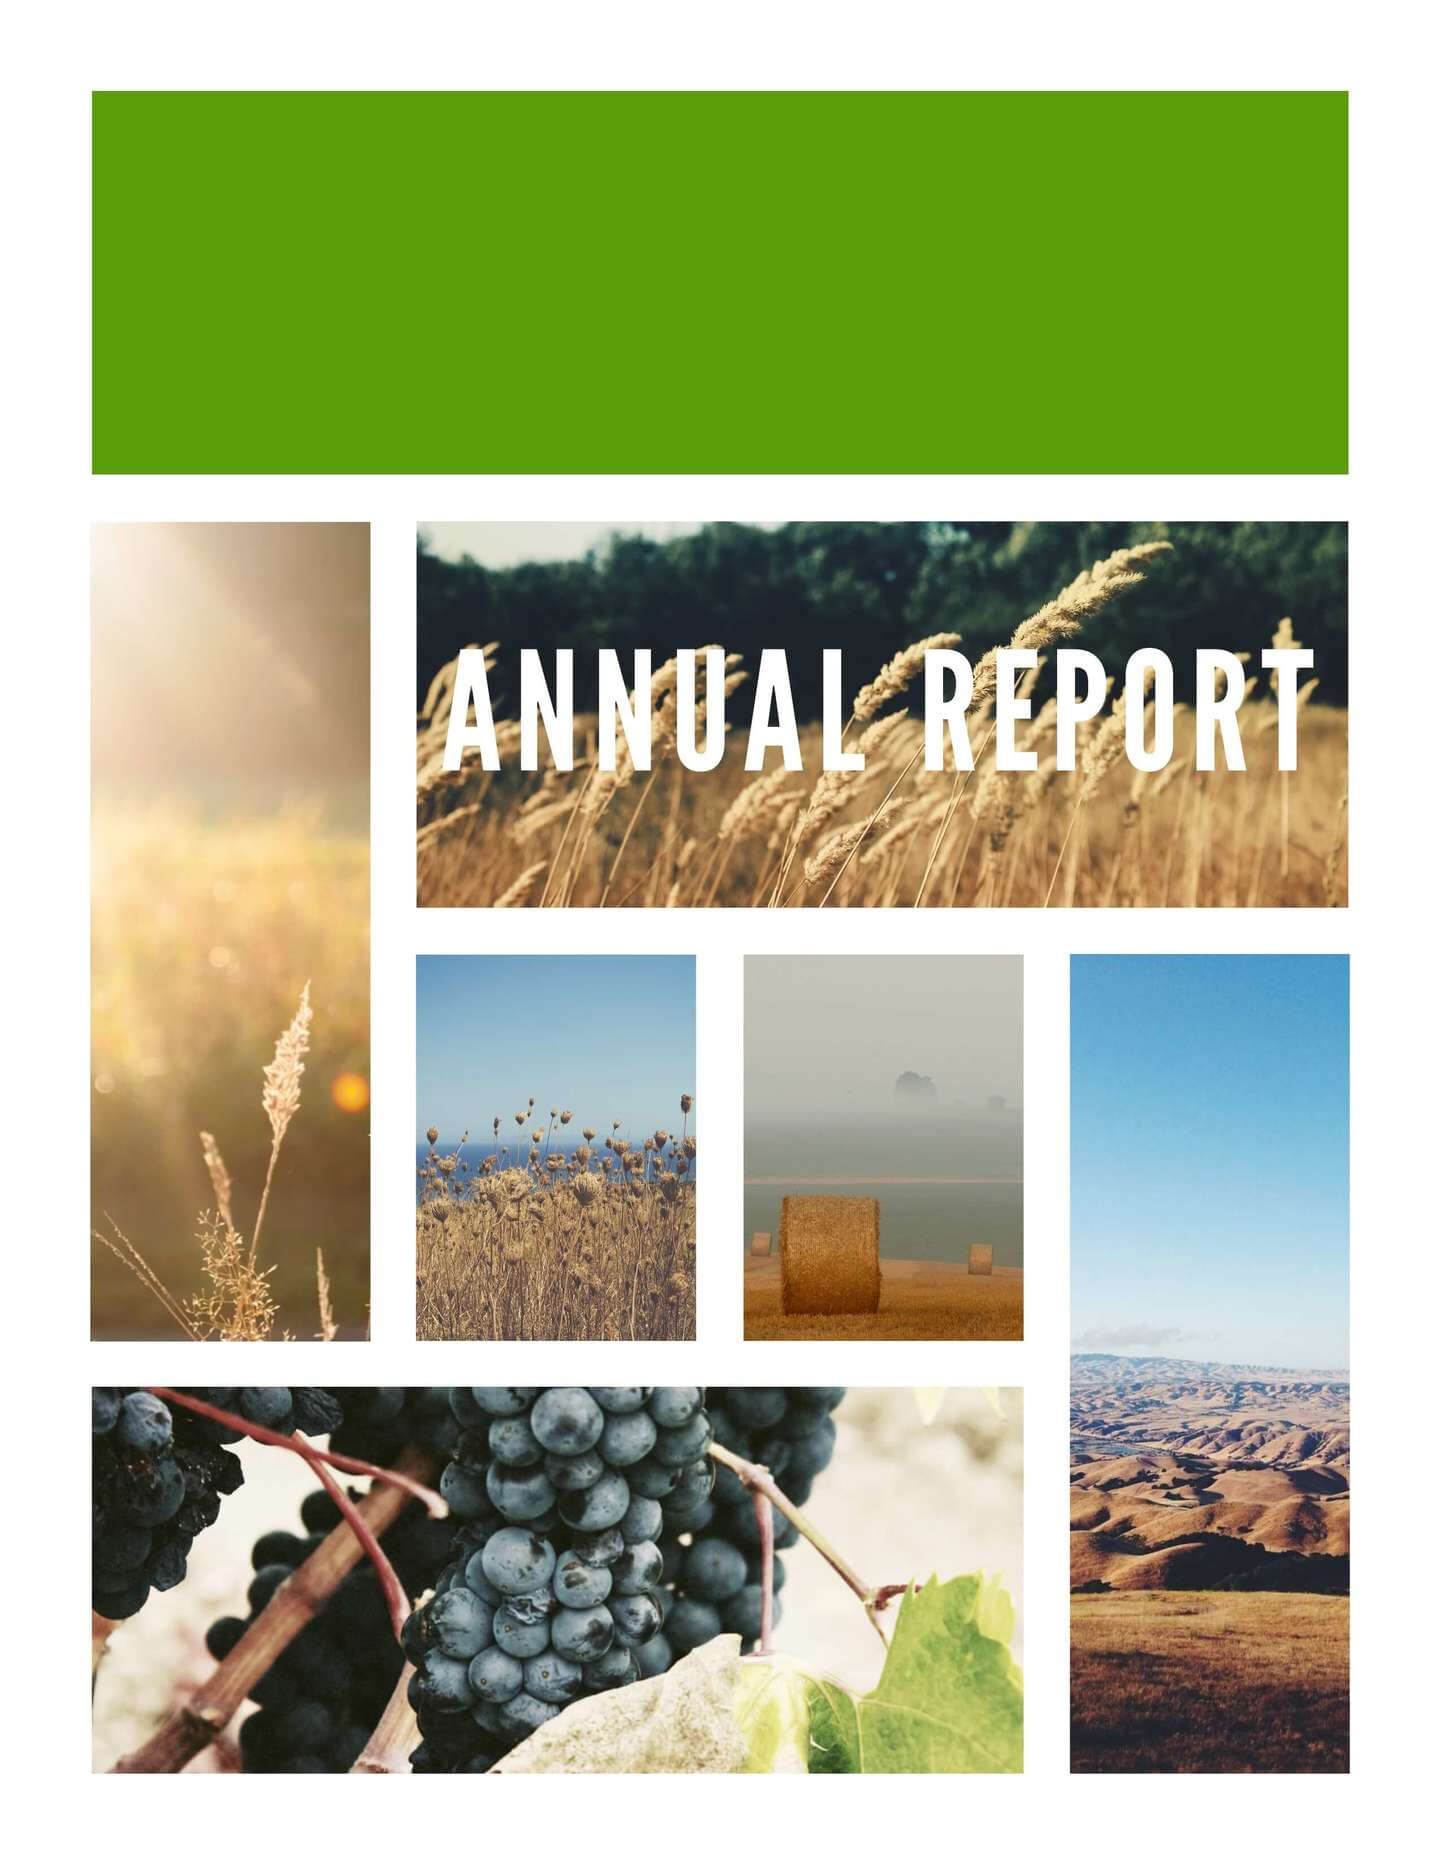 Free Annual Report Templates & Examples [6 Free Templates] Intended For Annual Report Template Word Free Download